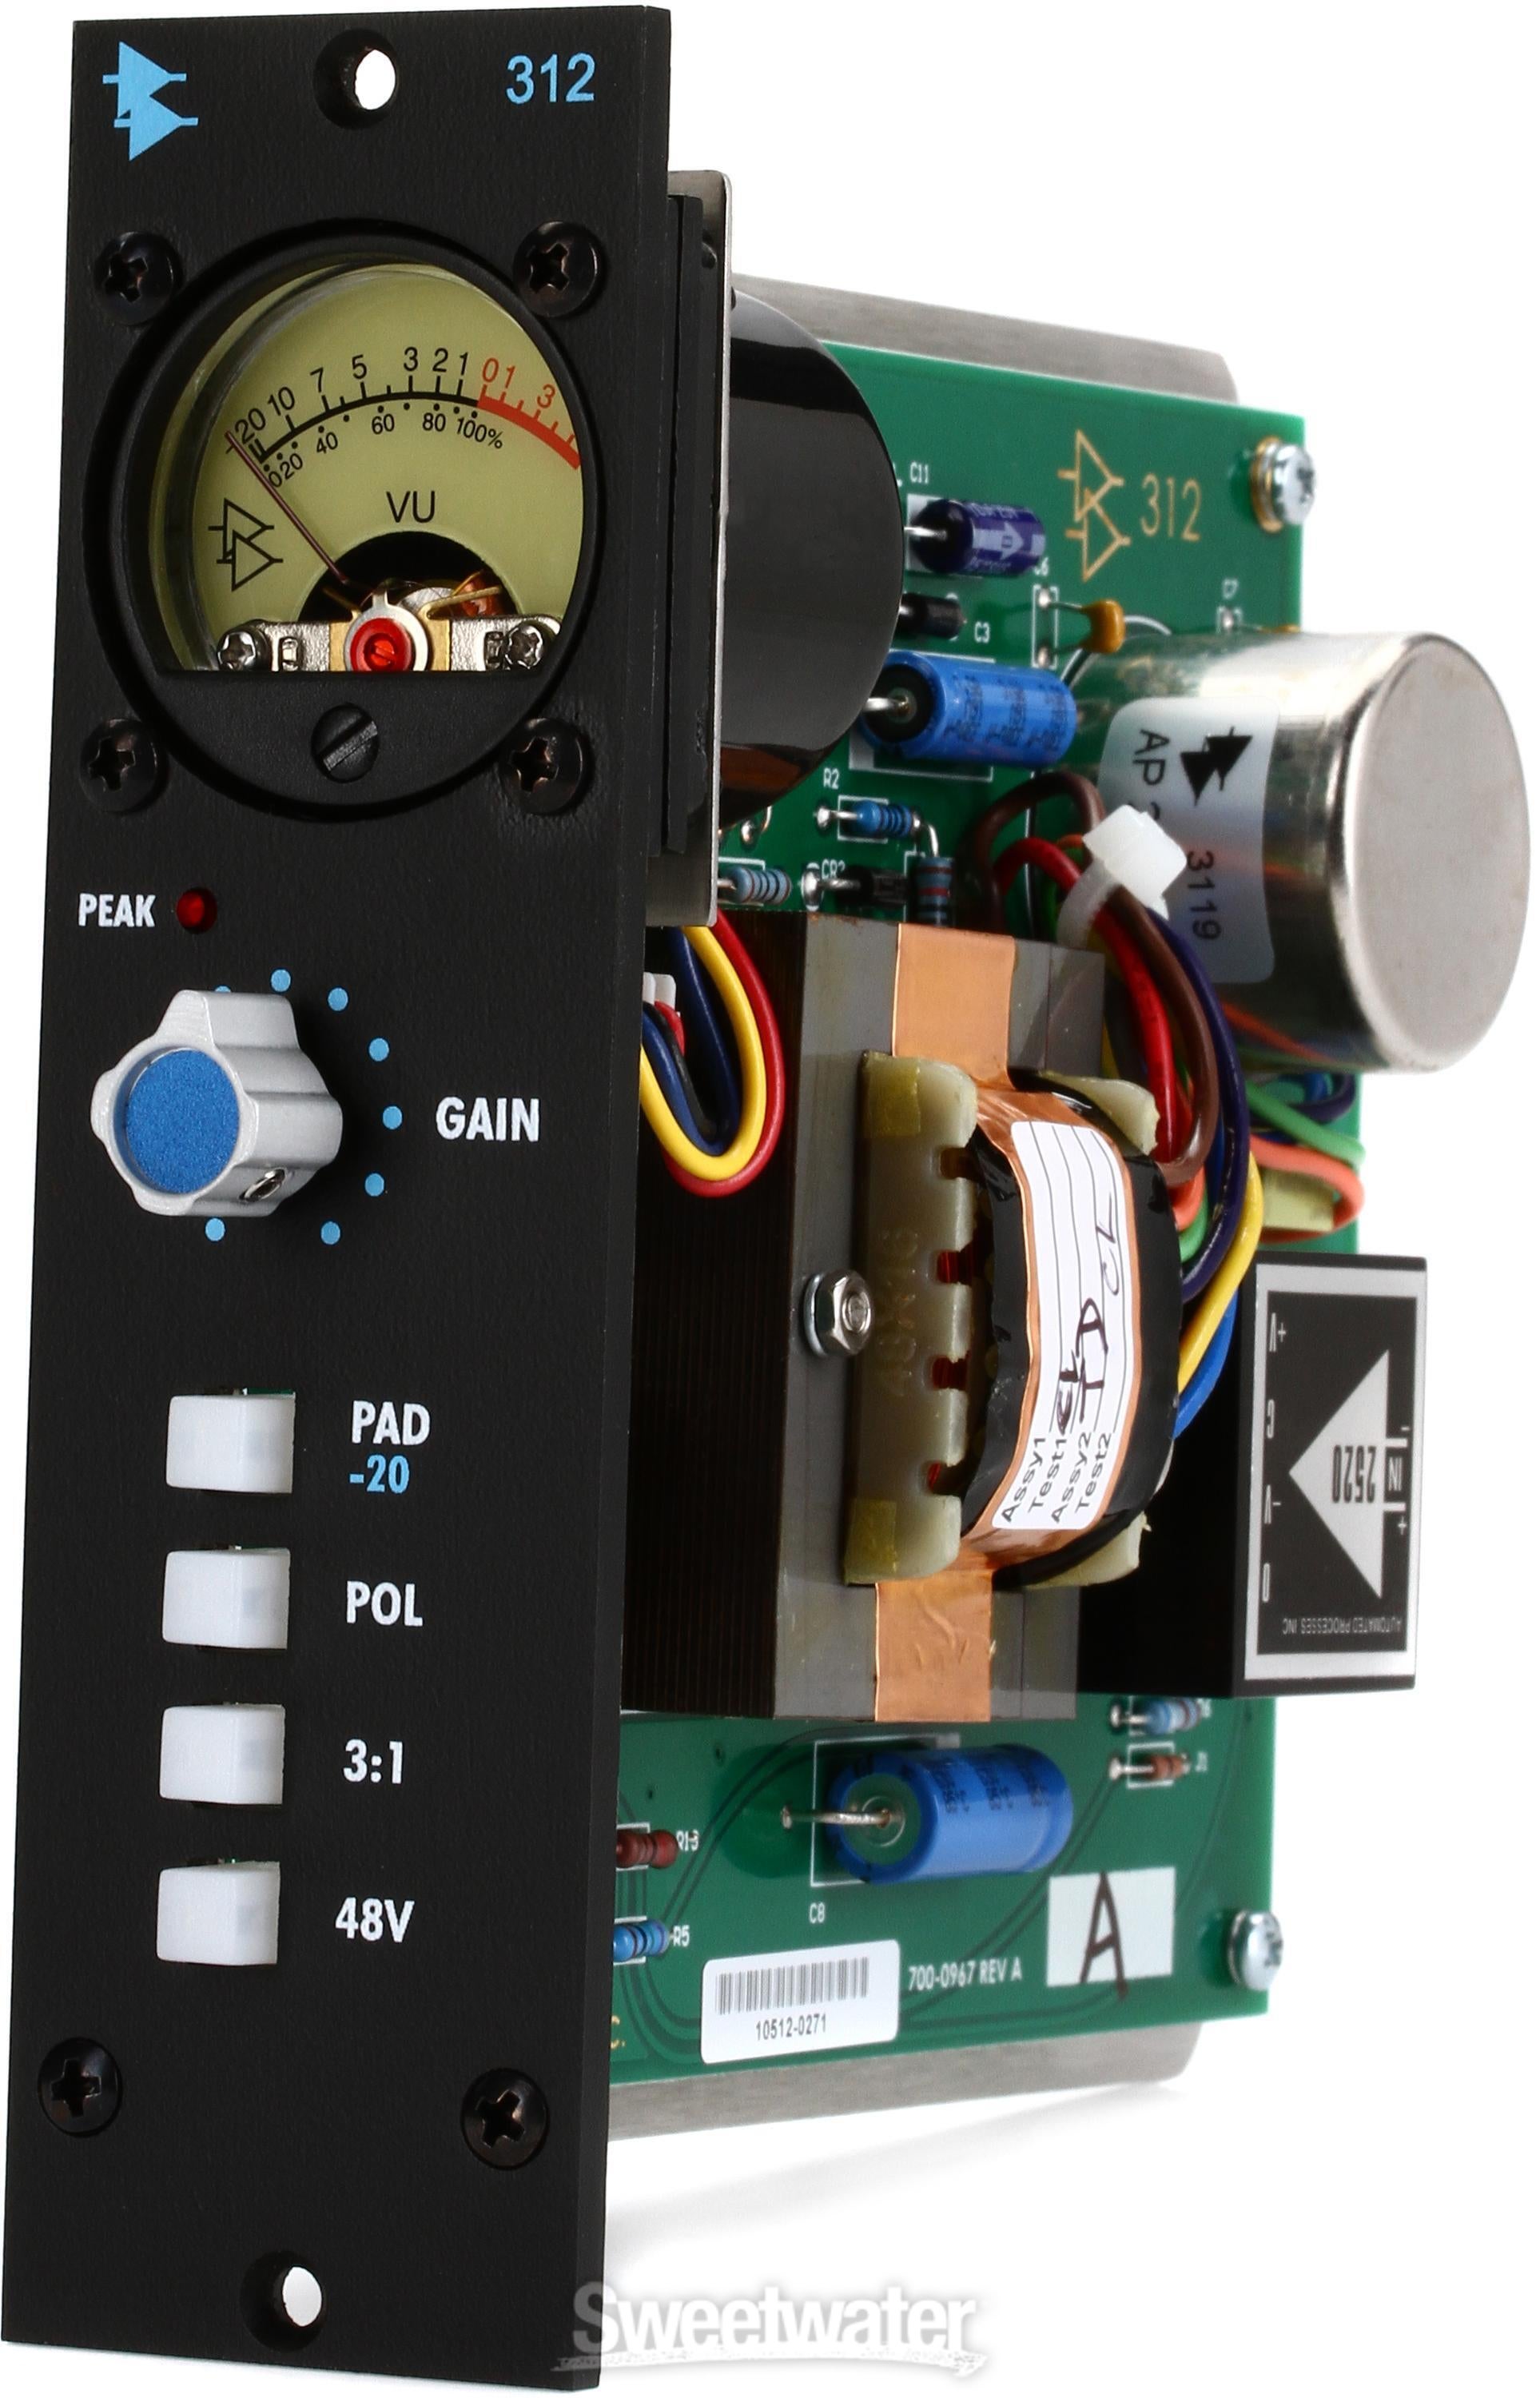 API 312 500 Series Microphone Preamp | Sweetwater